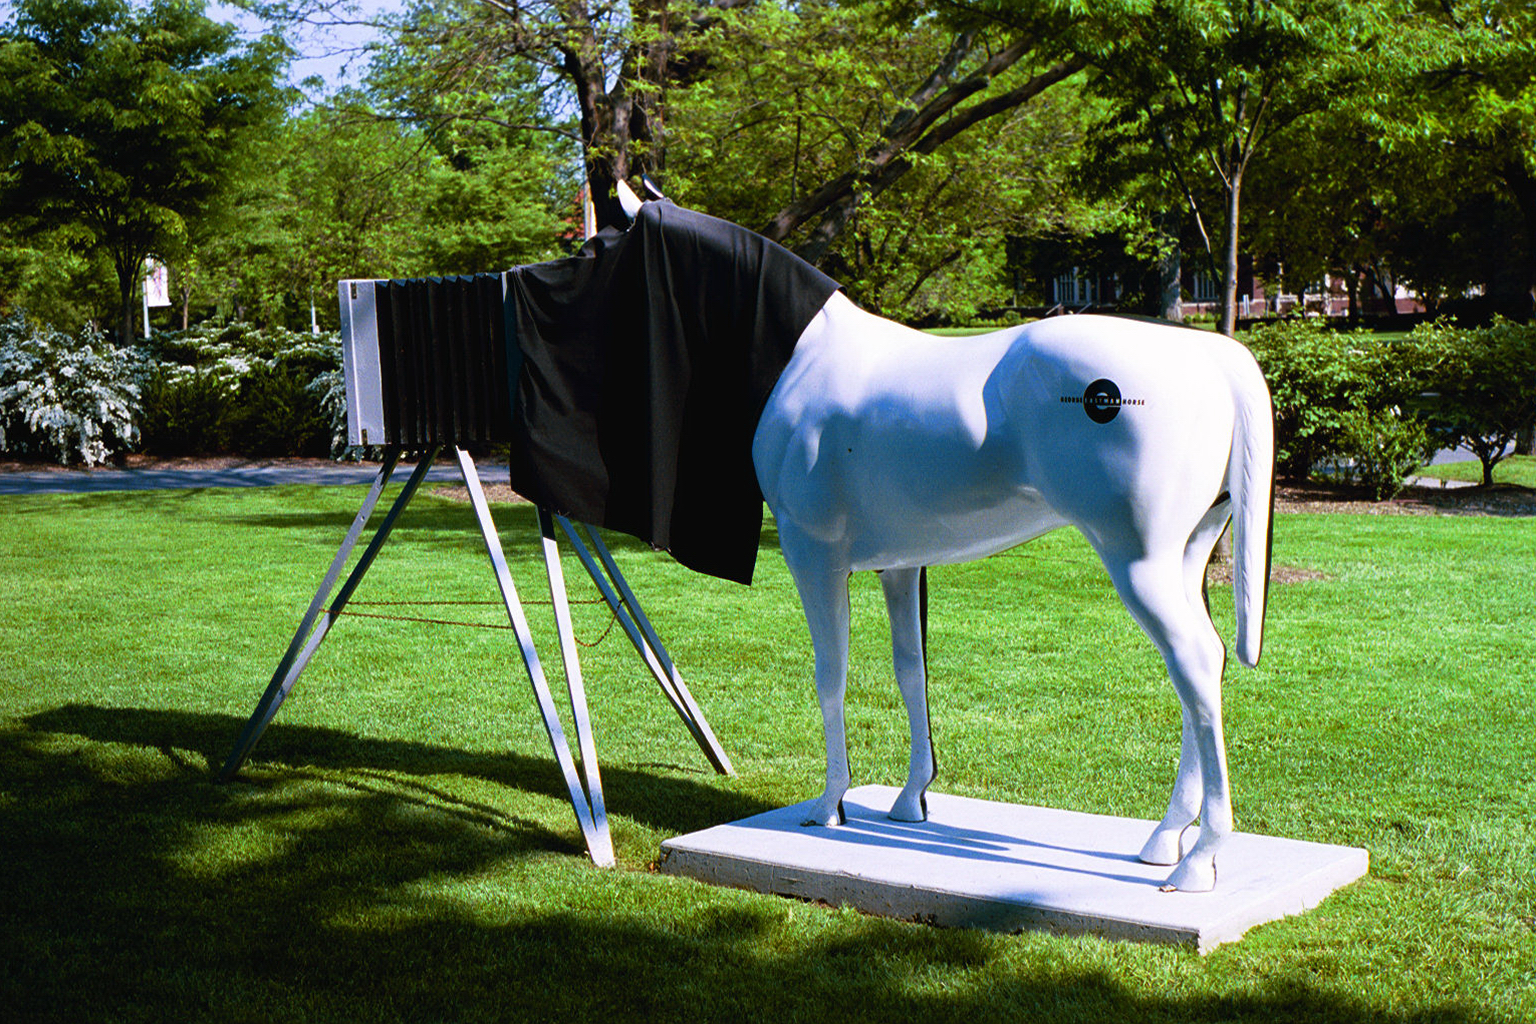 Eastman House entrant in the Rochester Horse exhibit